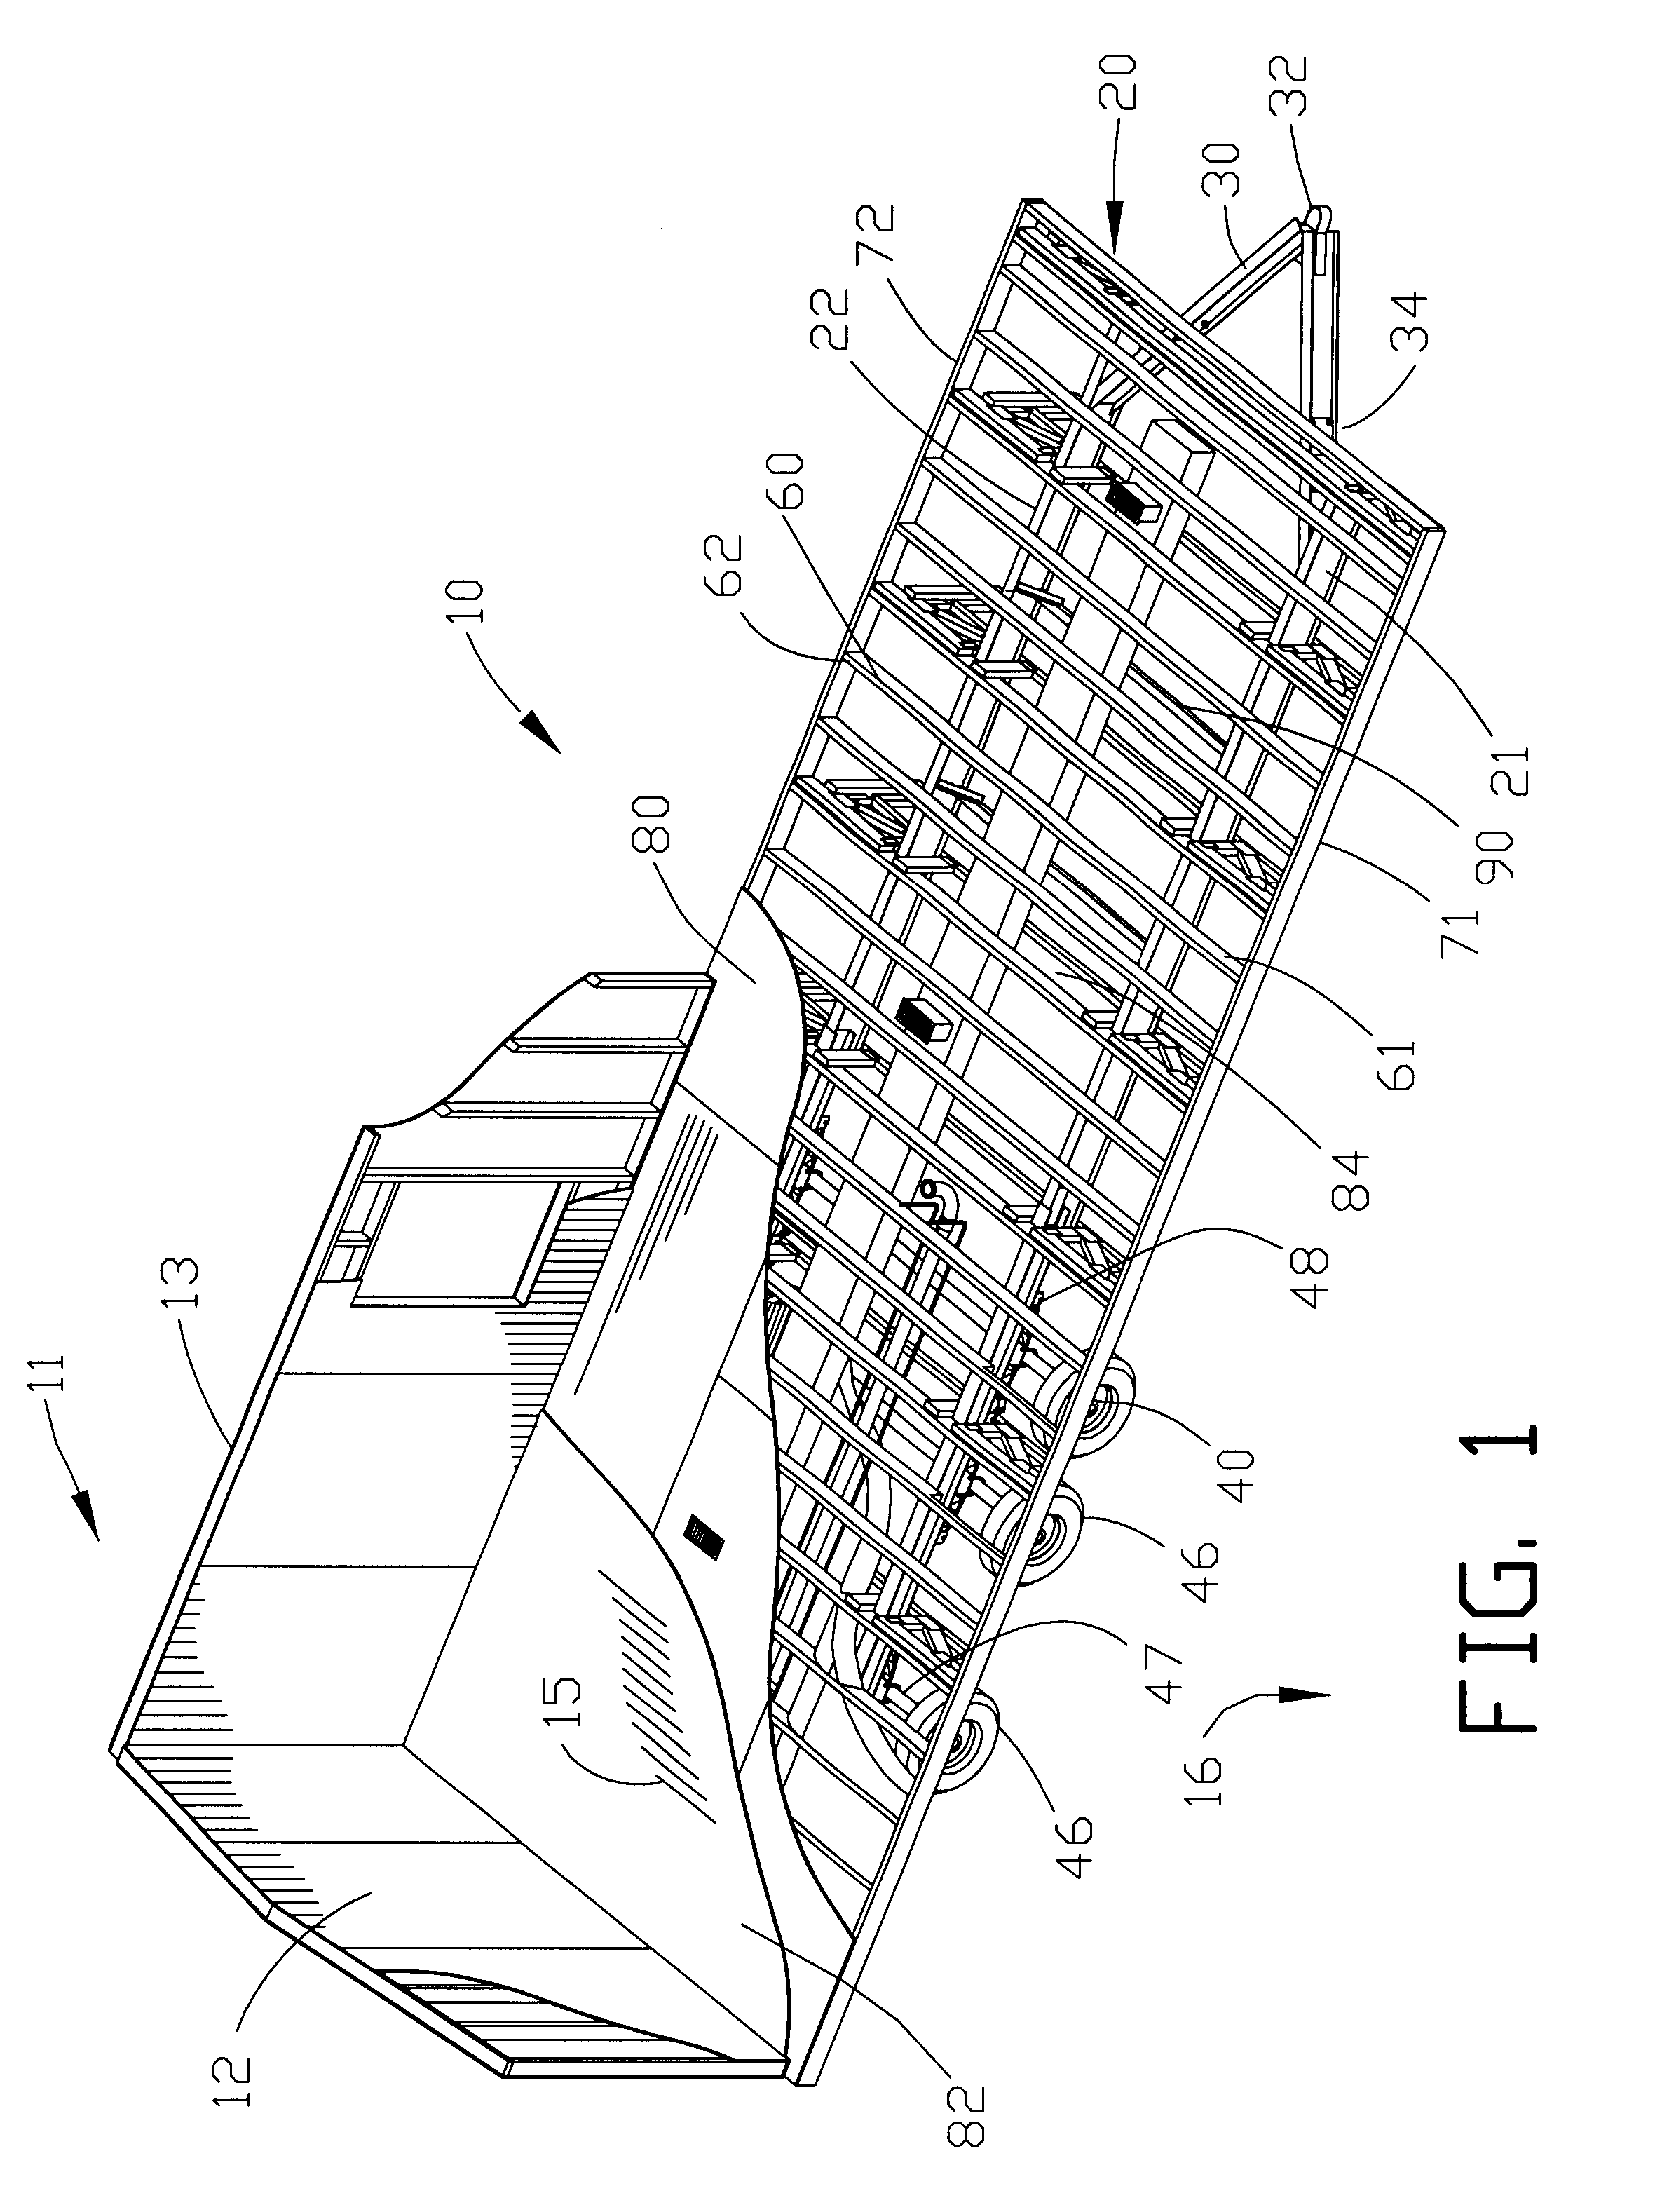 Frame for transporting a building structure on a wheel assembly